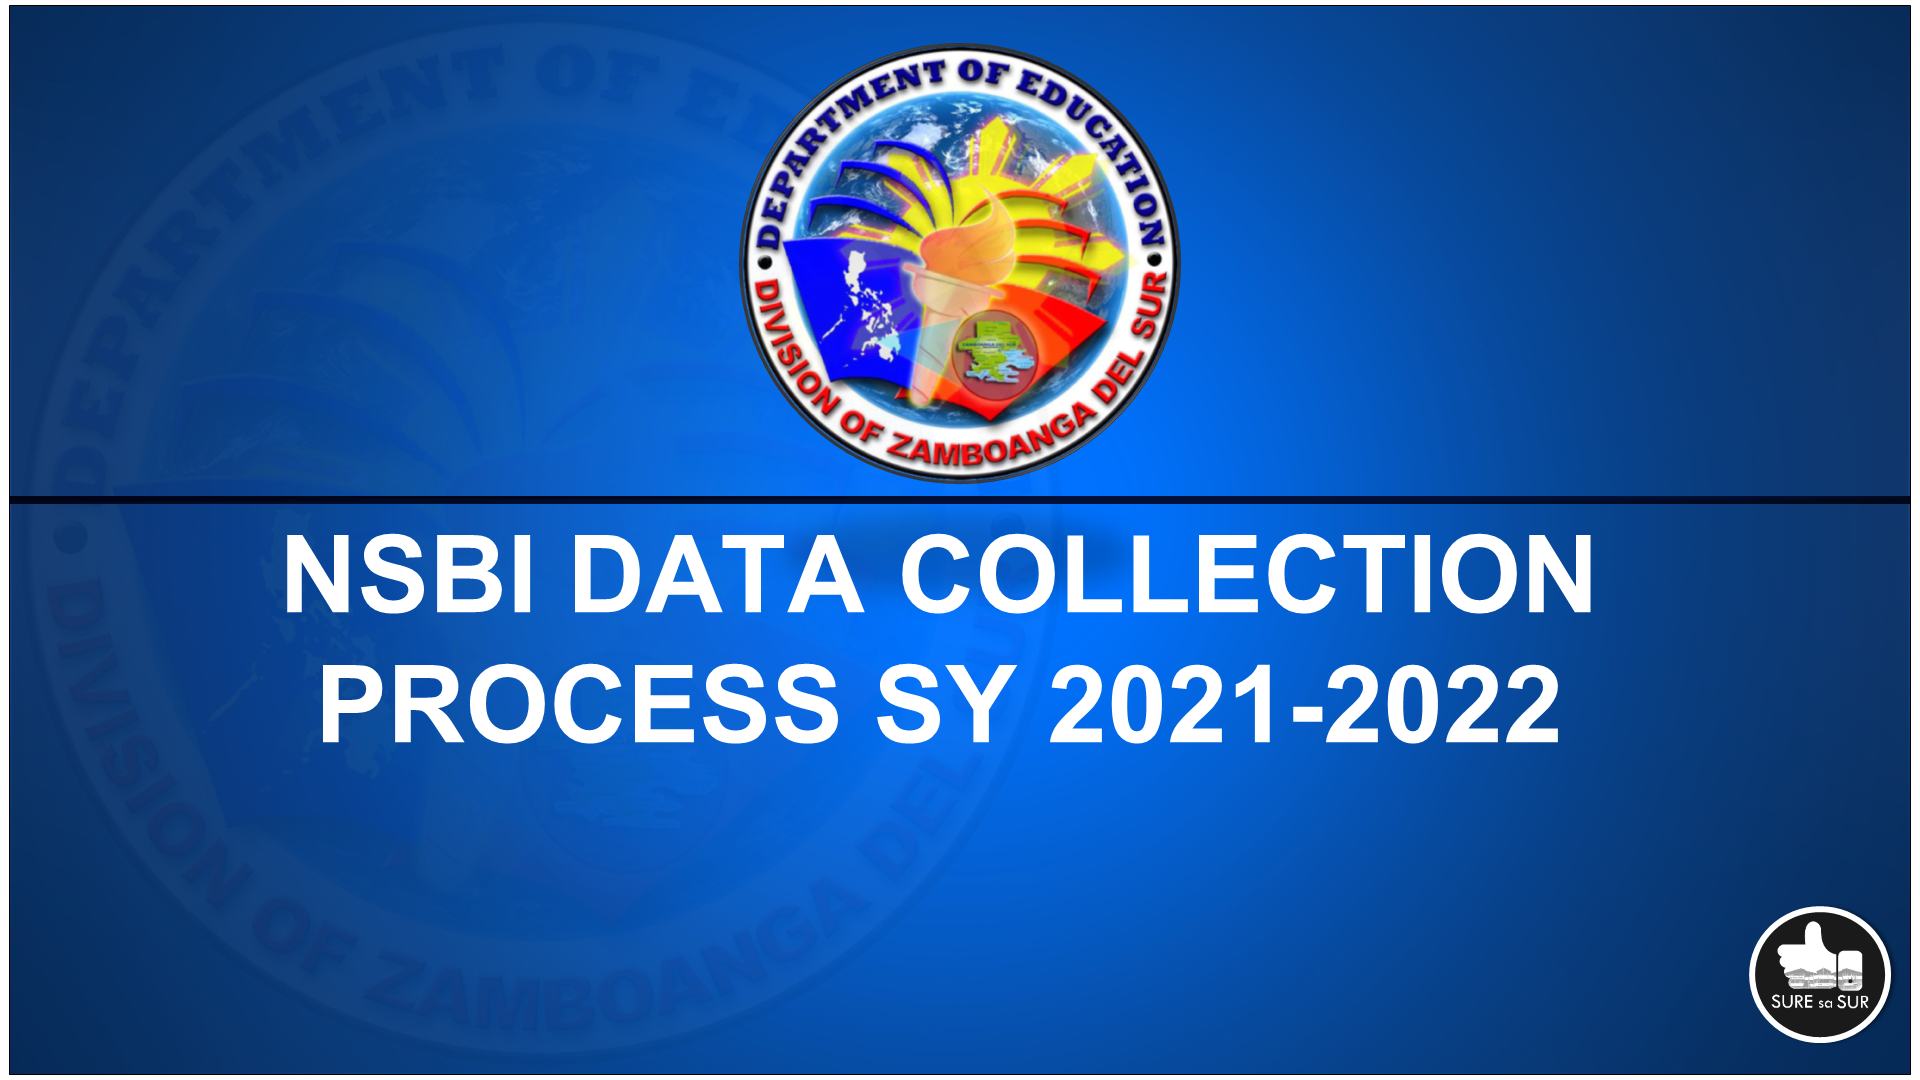 DepEd National School Building Inventory (NSBI) Data Collection Process